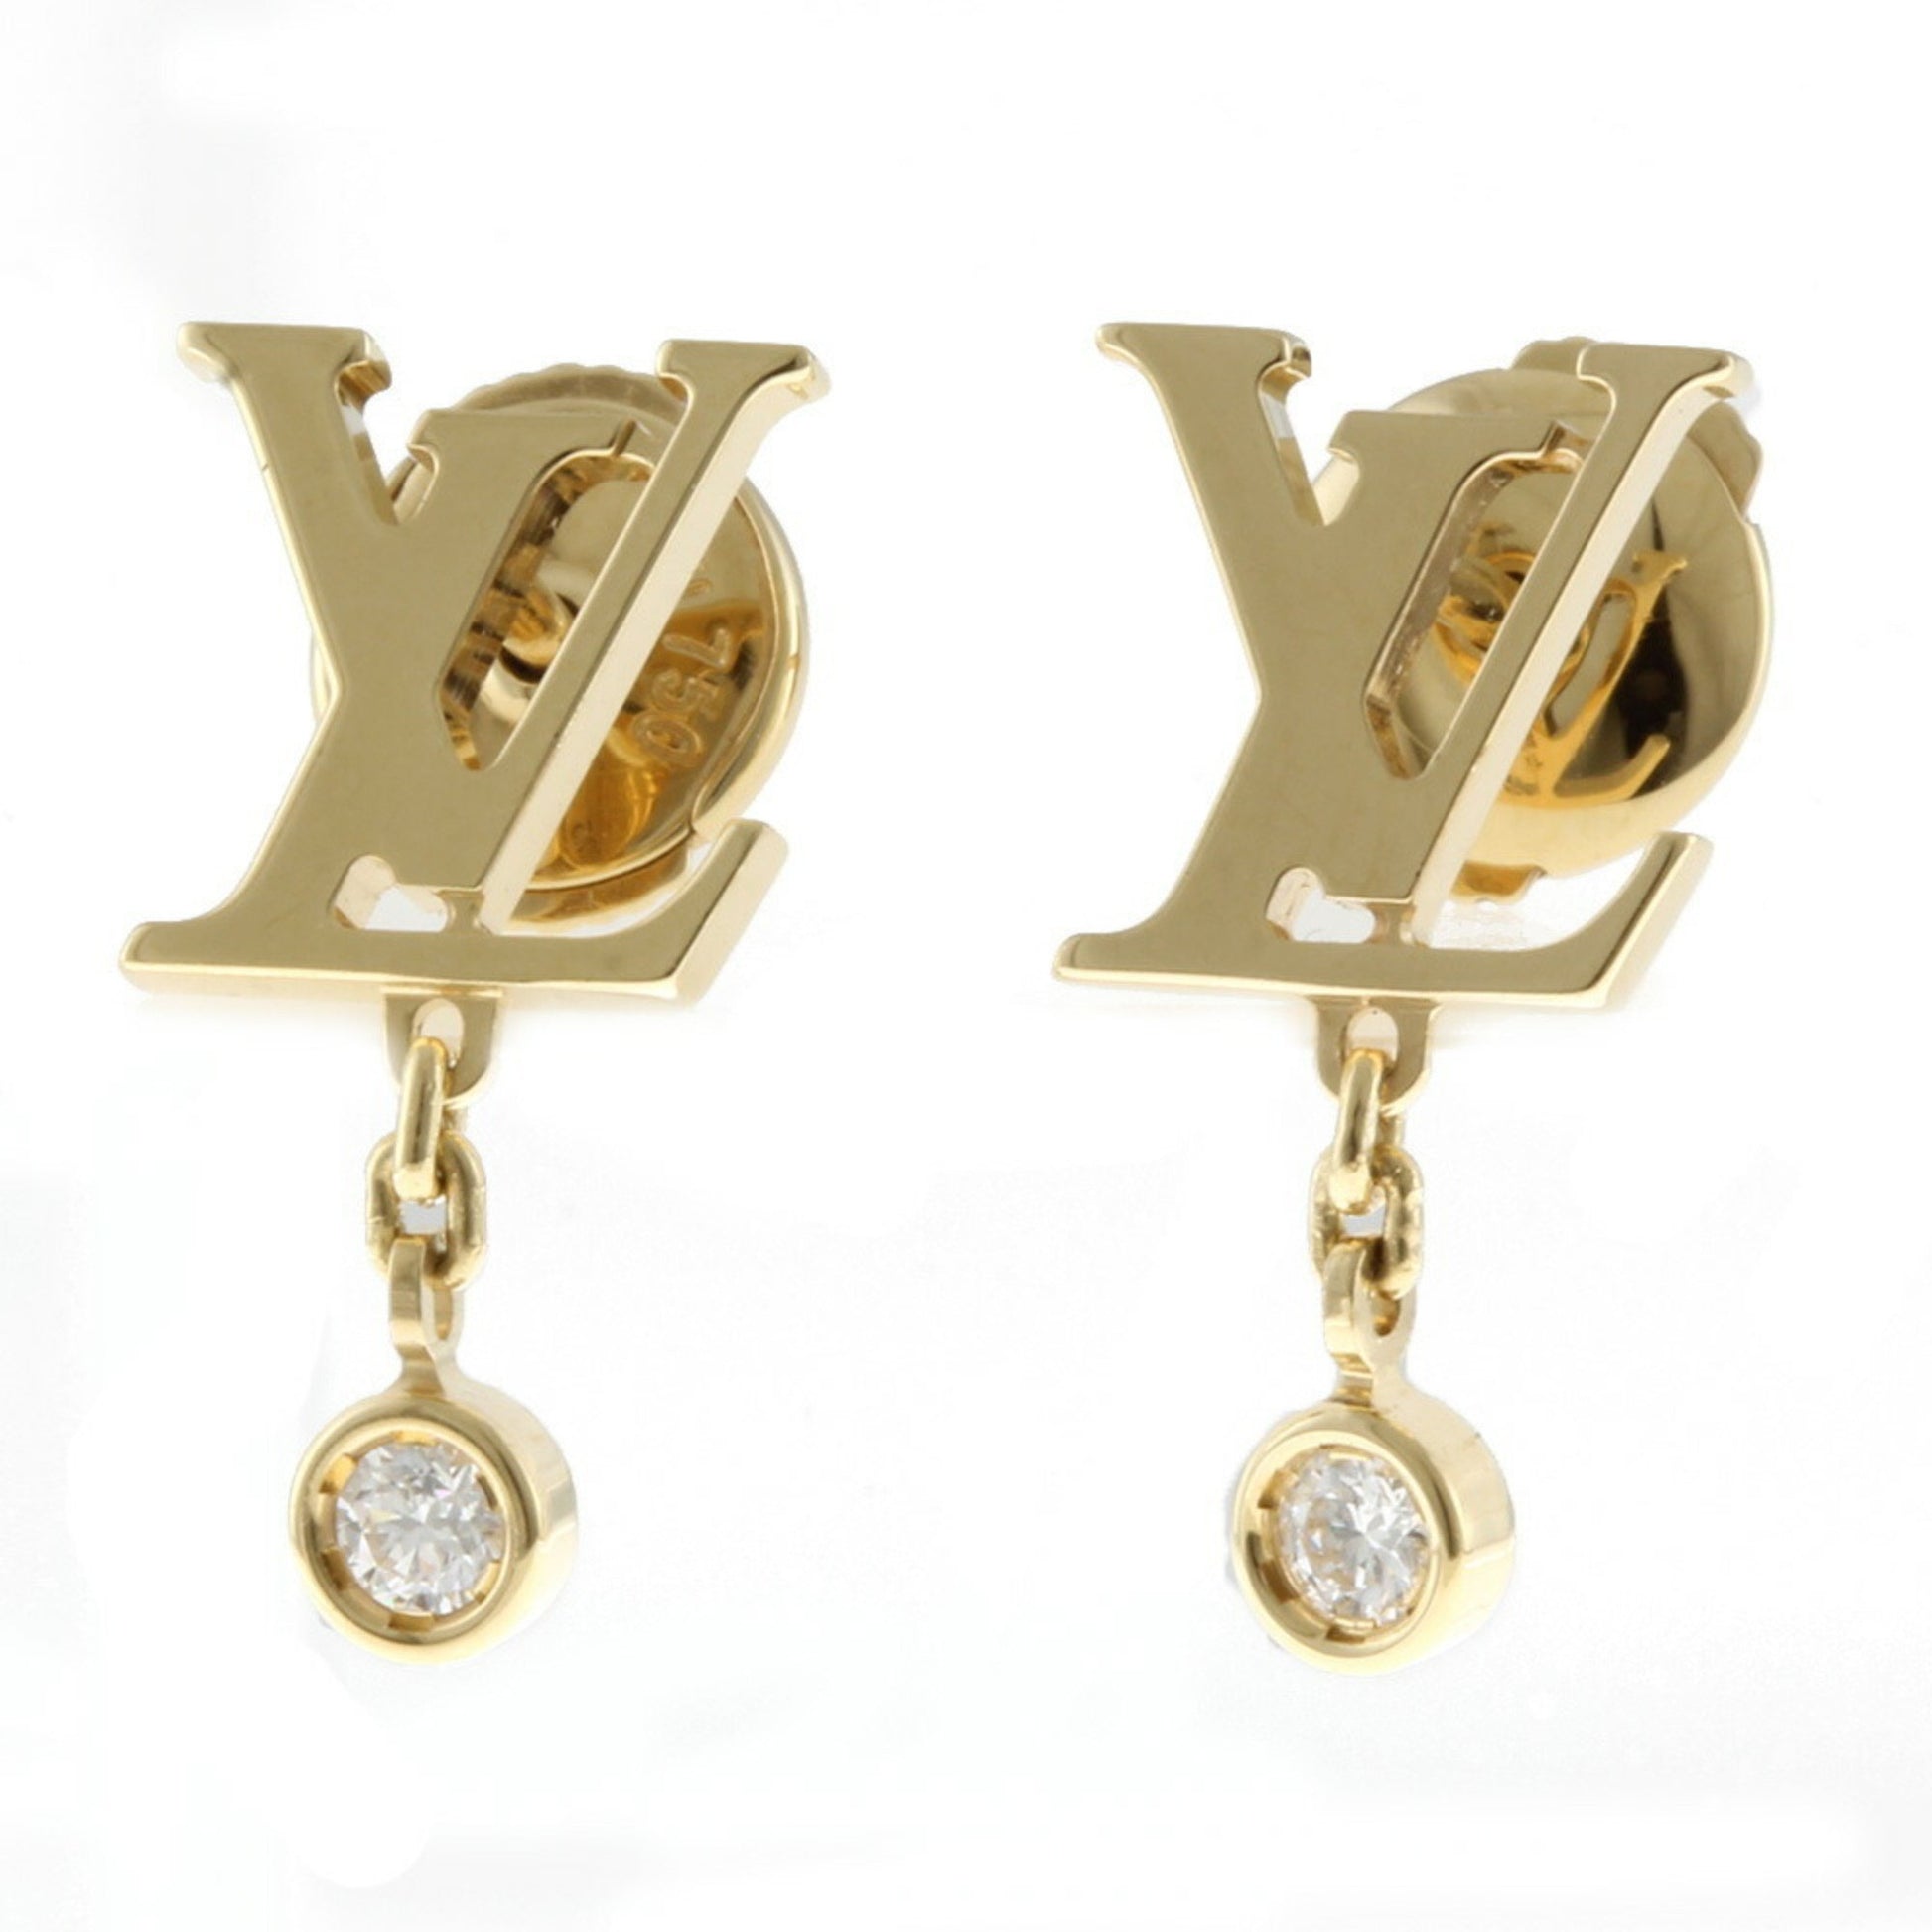 Louis Vuitton - Authenticated Idylle Blossom Earrings - Yellow Gold Gold for Women, Very Good Condition